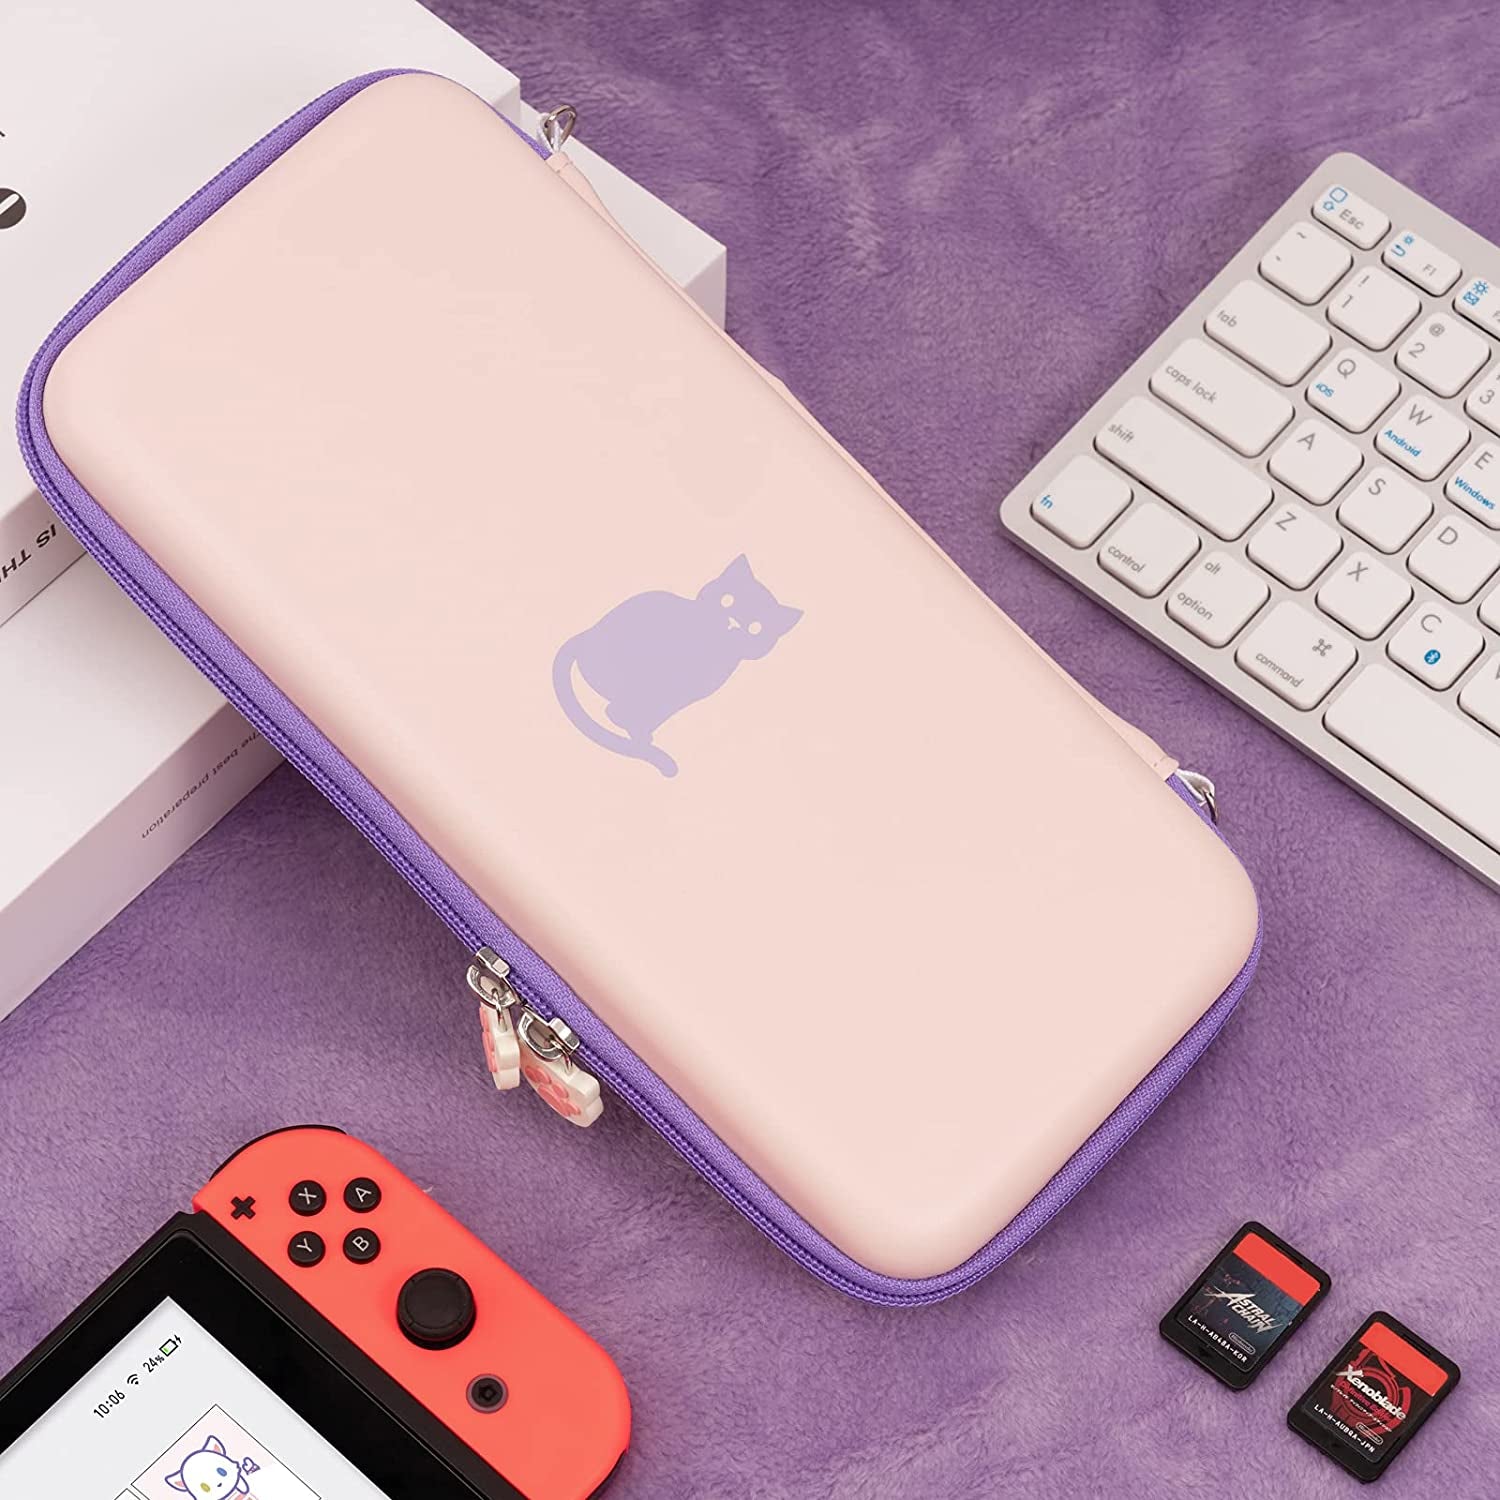 Cute Cat Paw Case Compatible with Nintendo Switch/Switch OLED - Portable Hardshell Slim Travel Carrying Case Fit Switch Console & Game Accessories - a Removable Wrist Strap (Pink Purple)